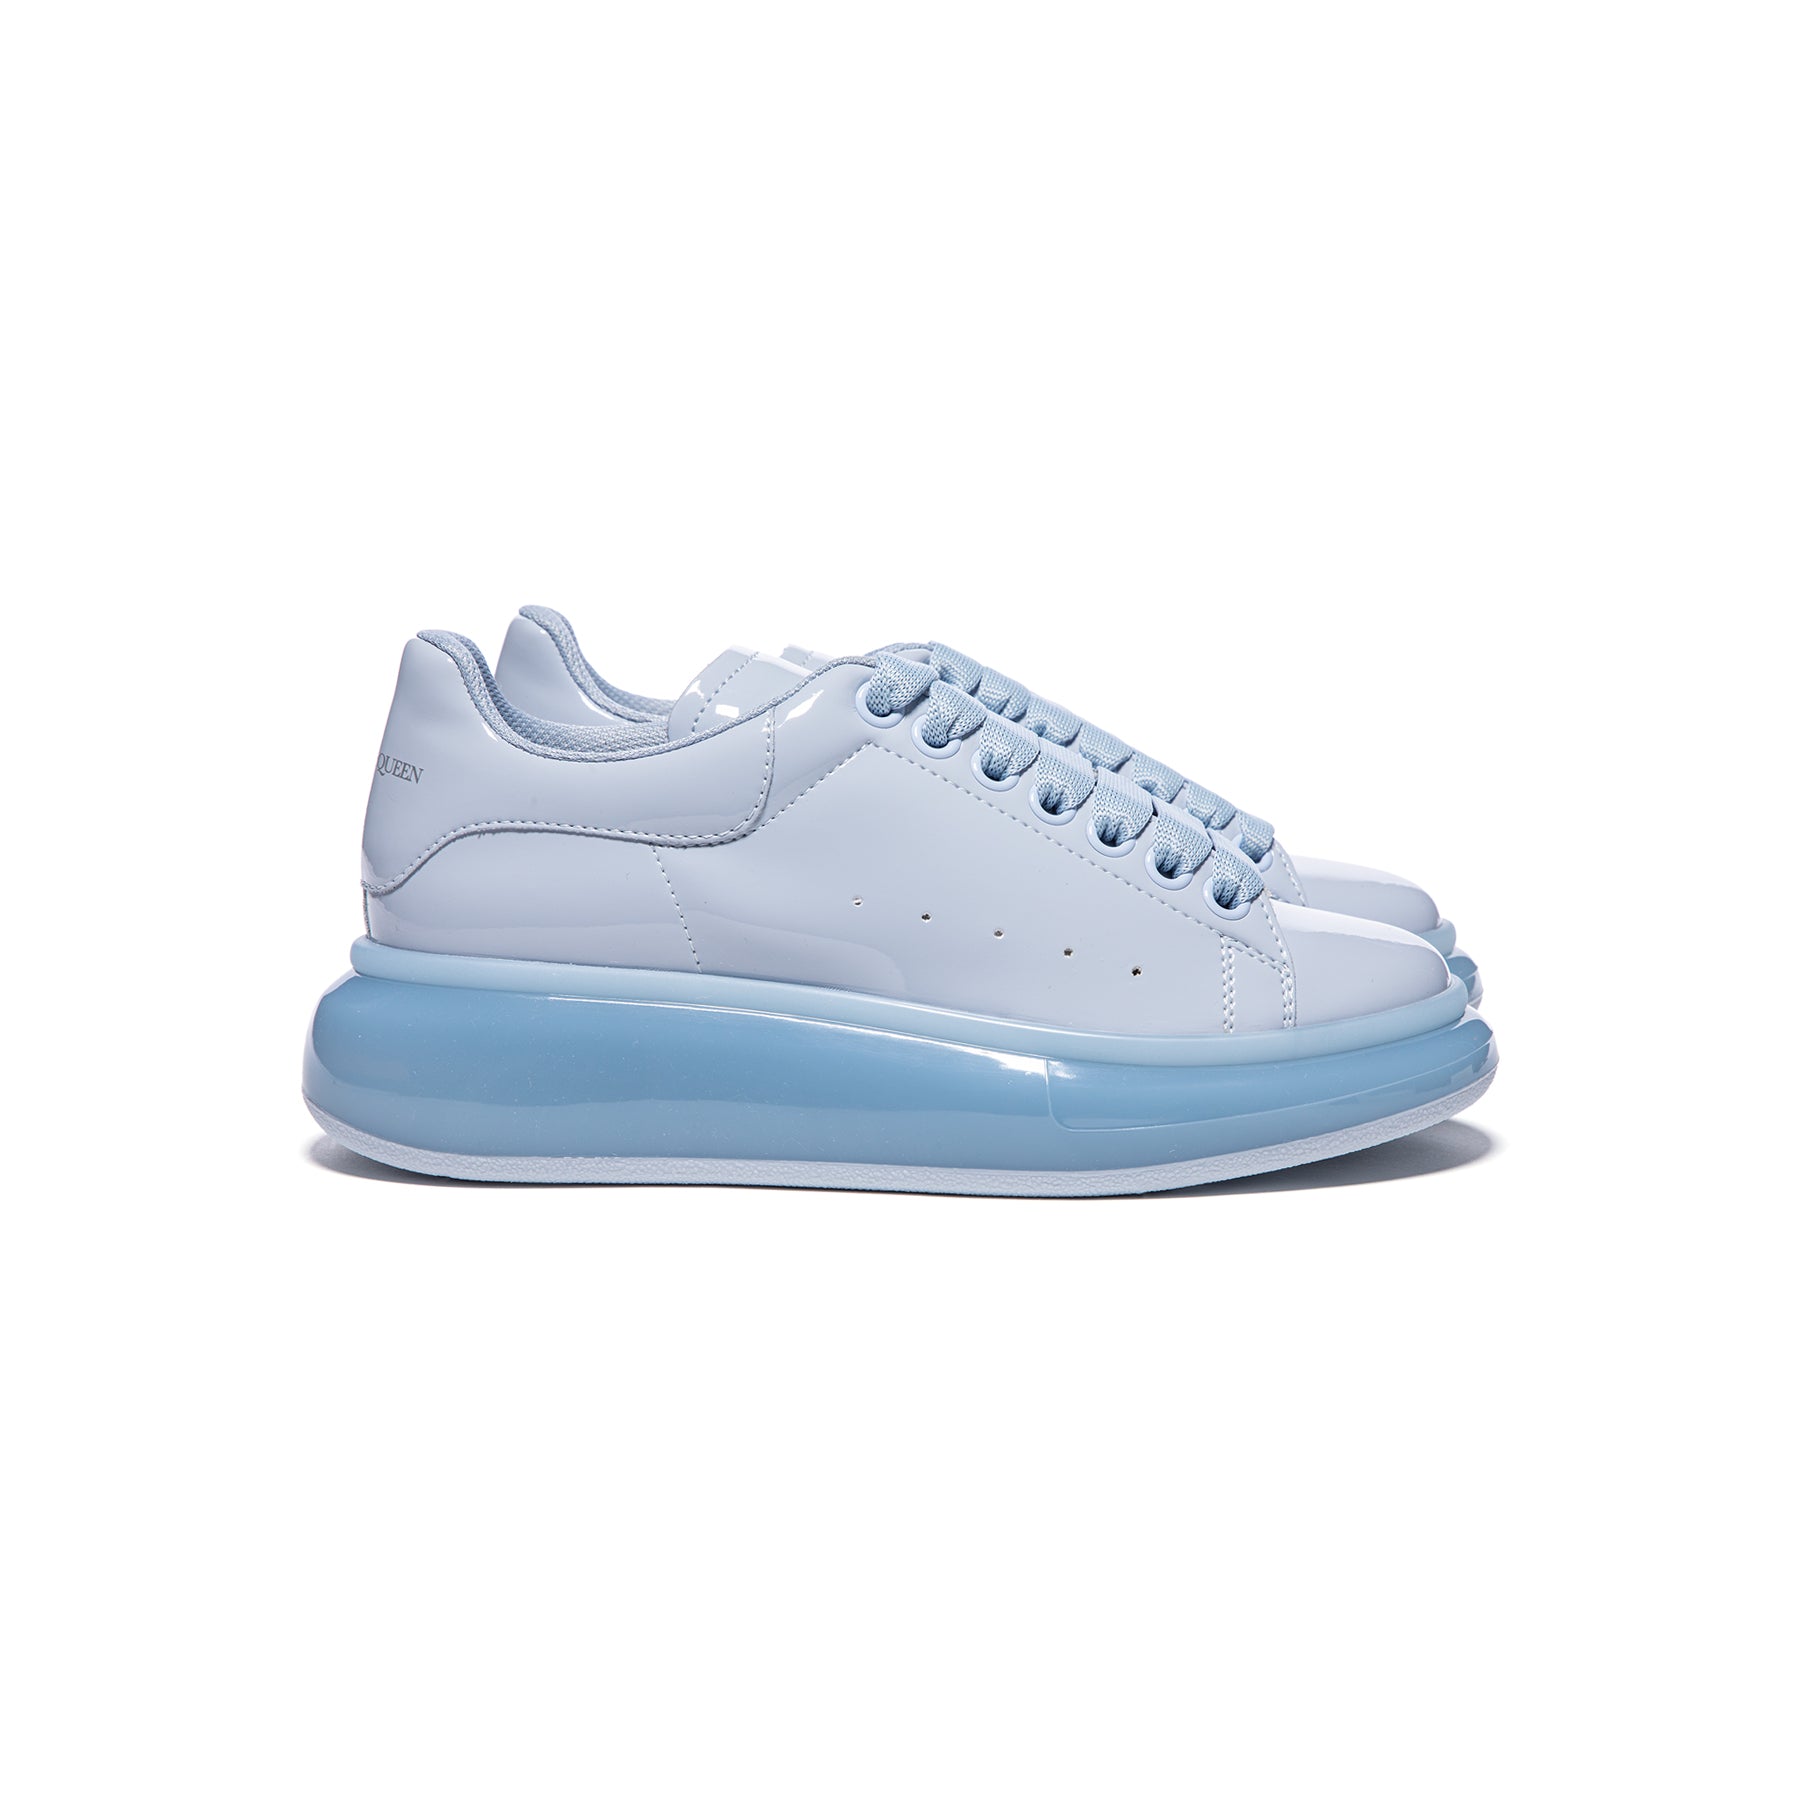 Alexander McQueen Sneaker Fabric Upper and Rub (Spring Blue) Concepts